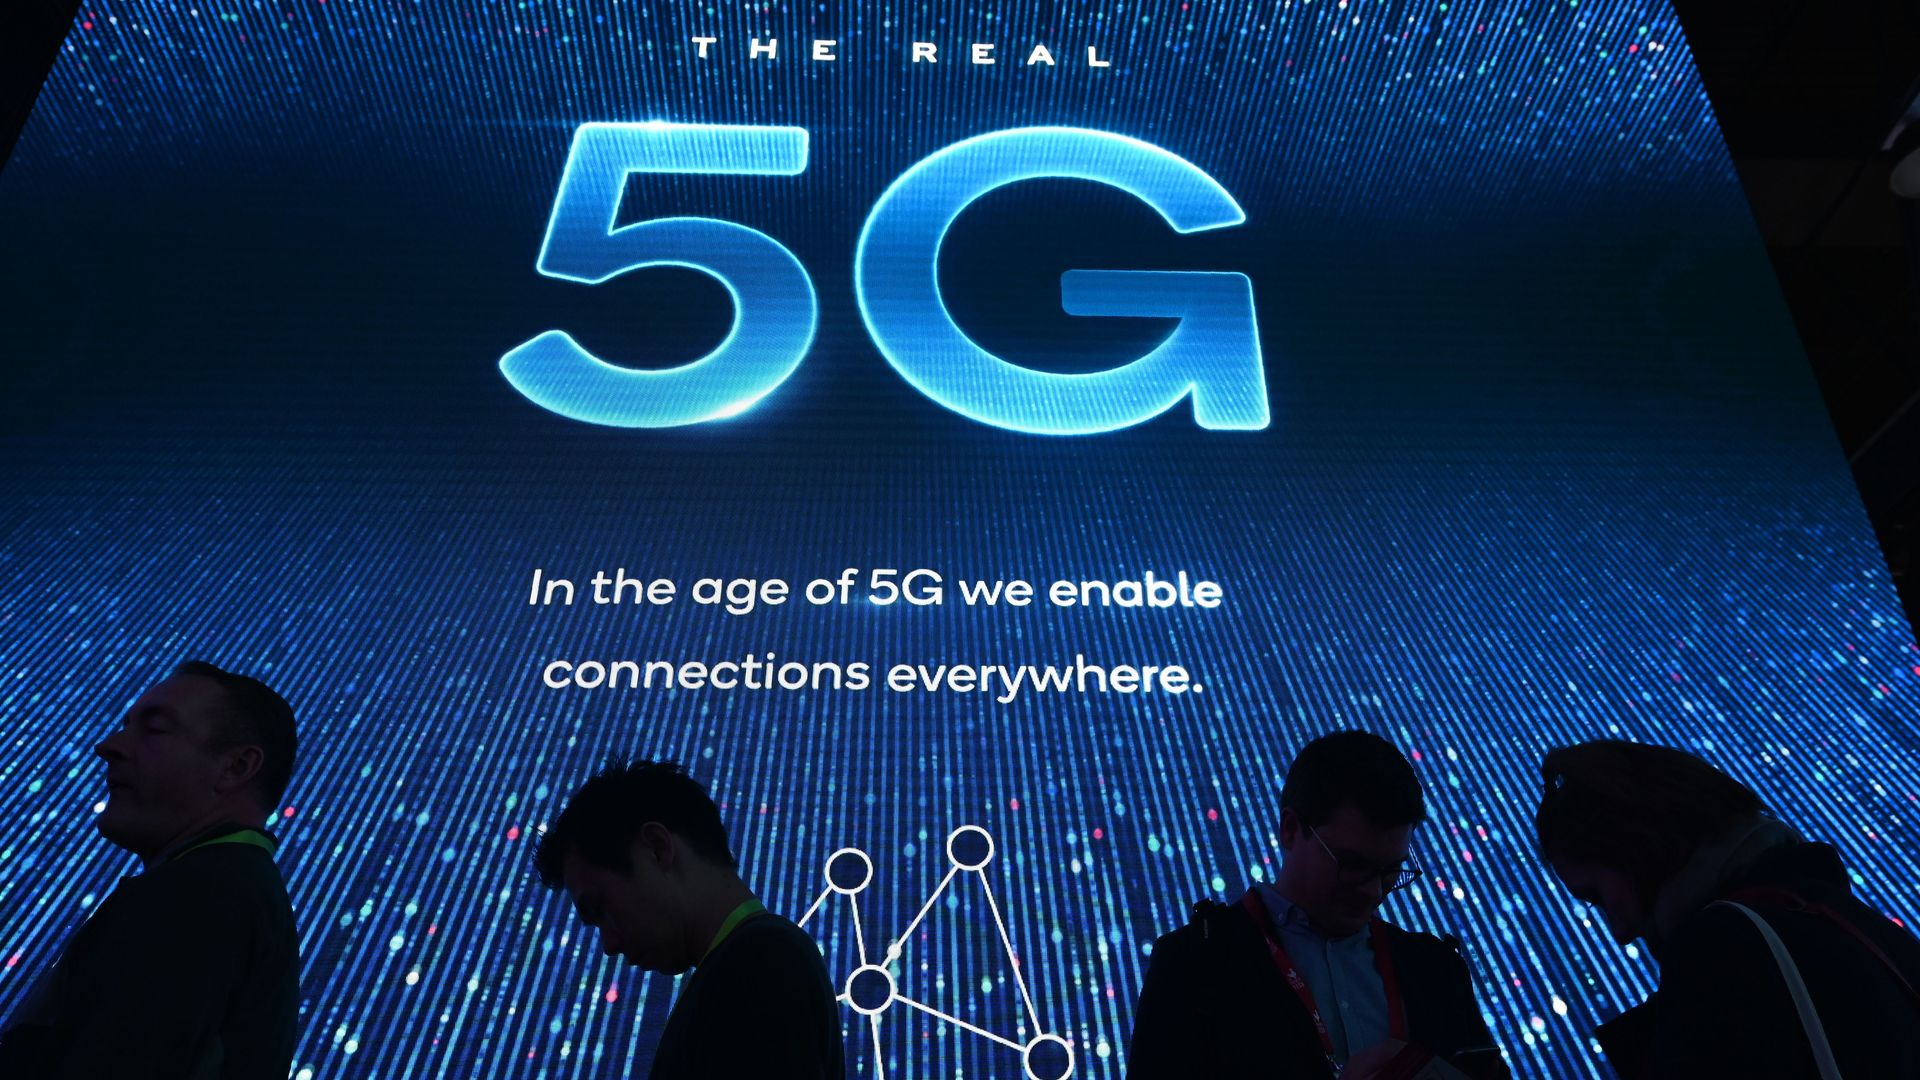  a 5G exhibition at the Qualcomm booth during CES 2019